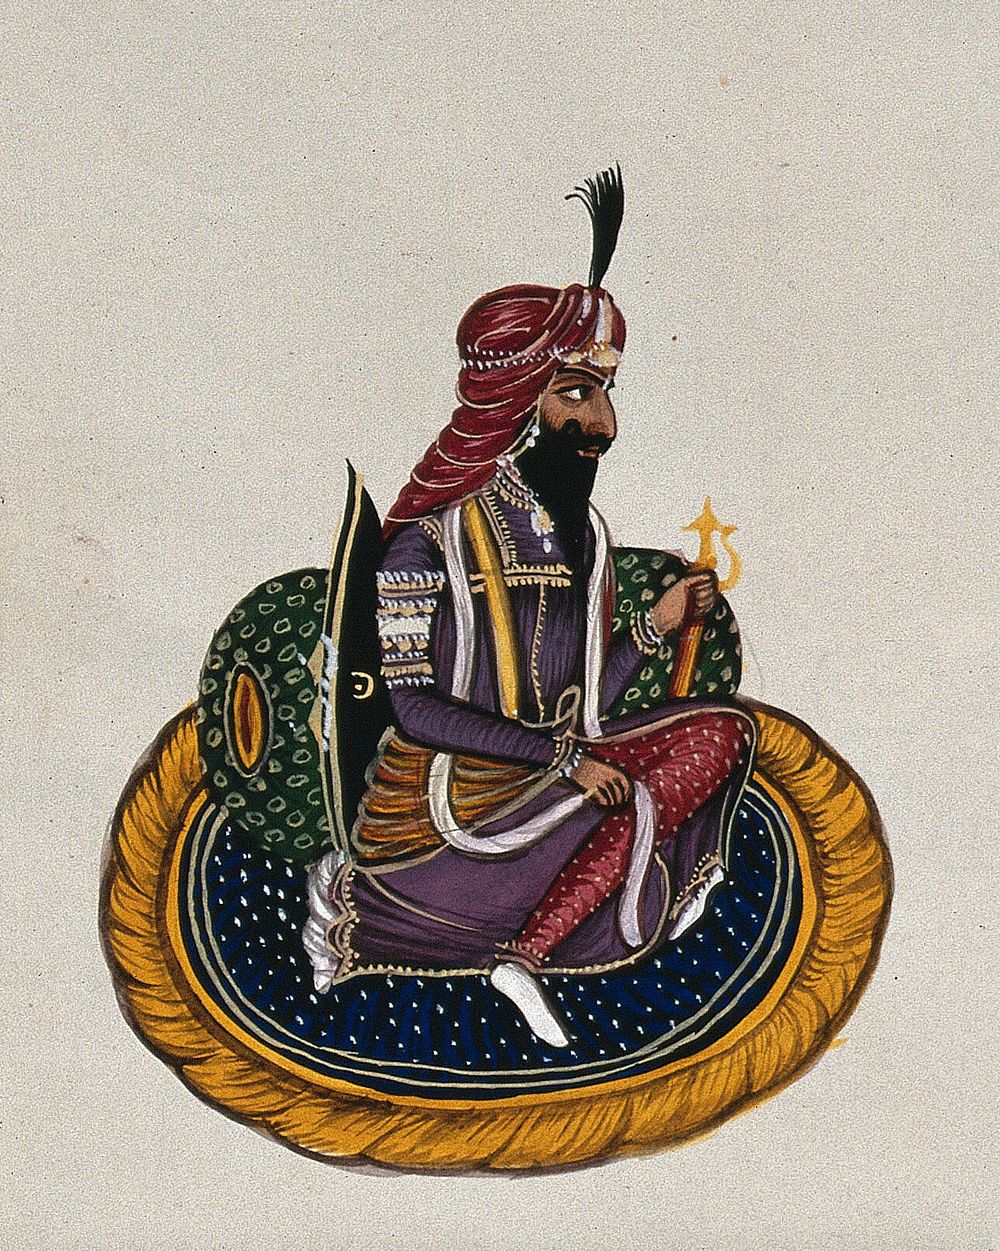 A Sikh nobleman. Gouache painting by an Indian painter.